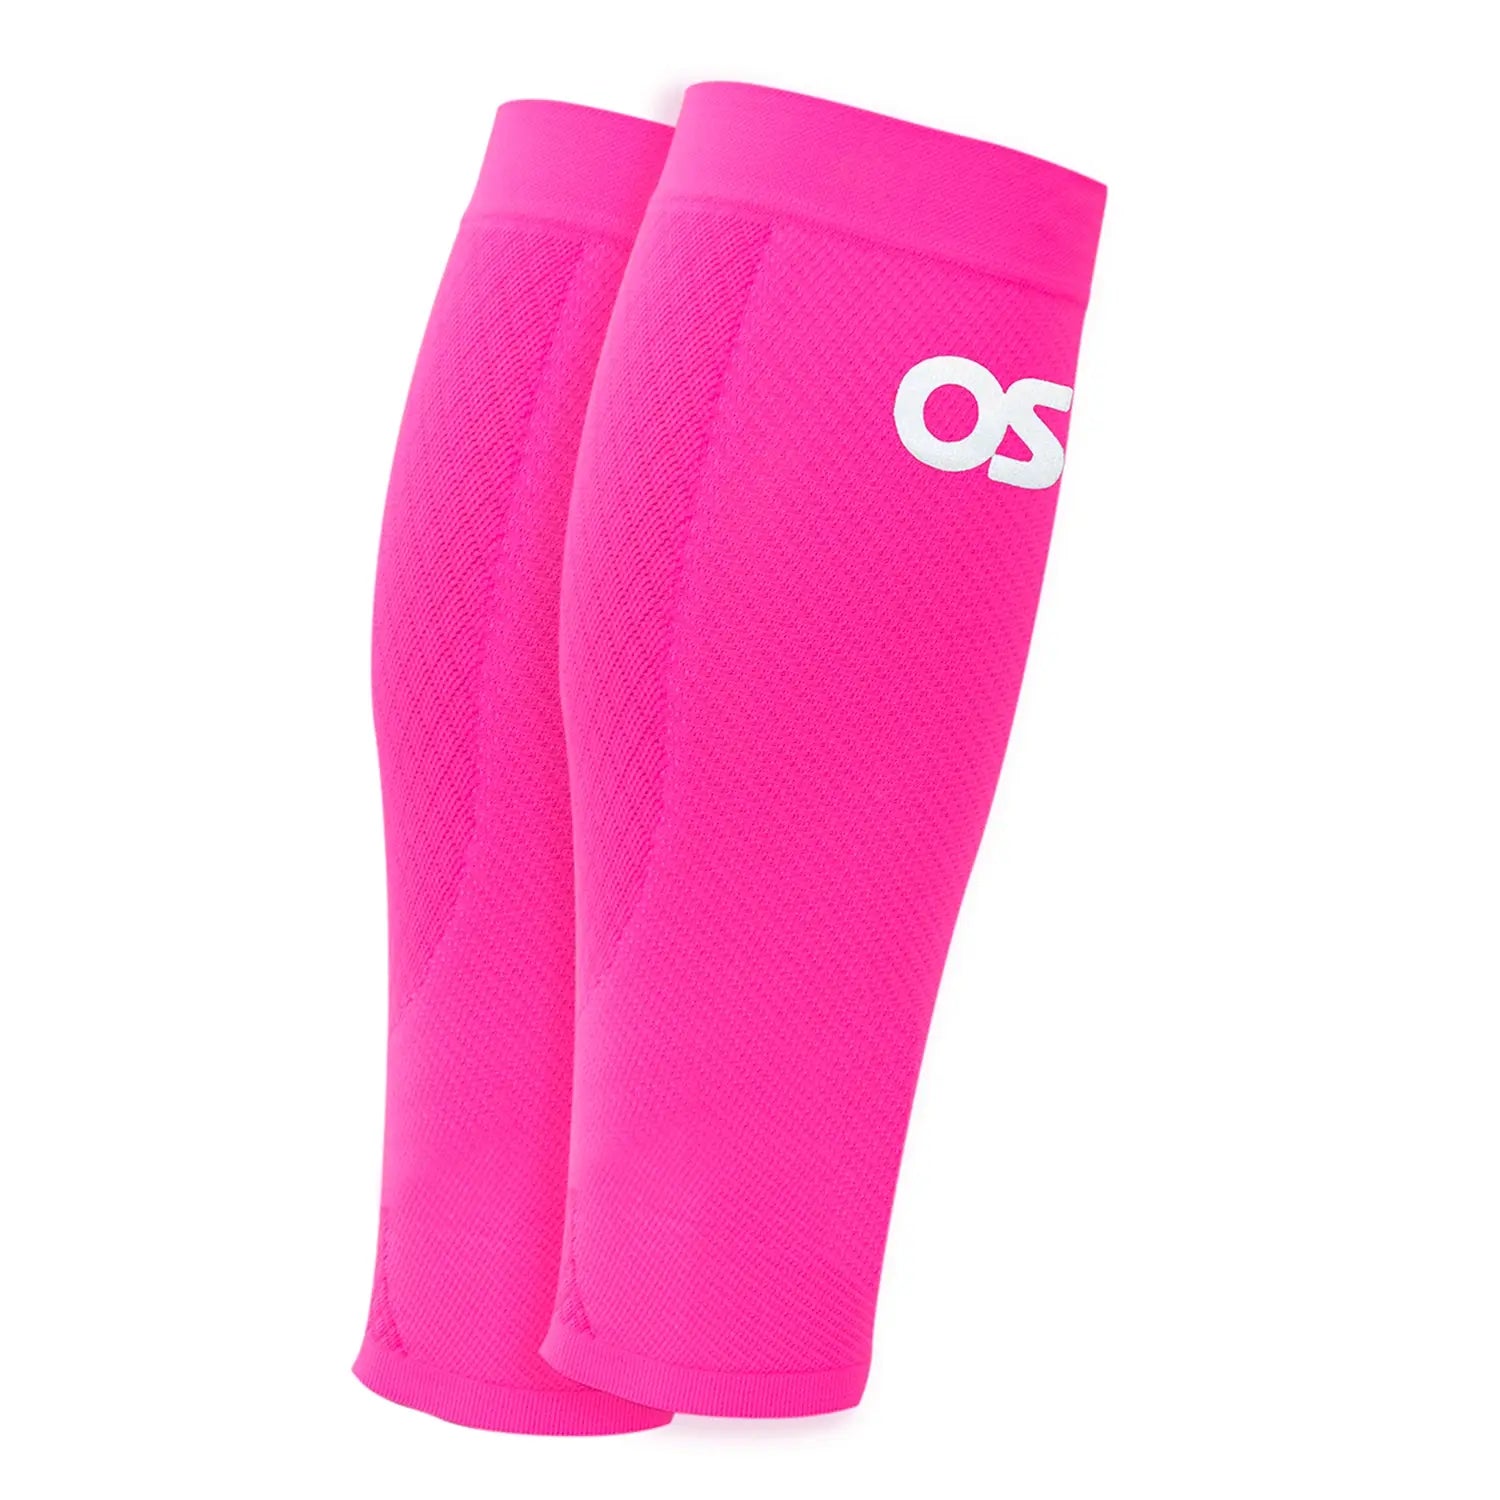 CS6 Calf Compression Sleeves For Lower Leg Pain & Swelling – My